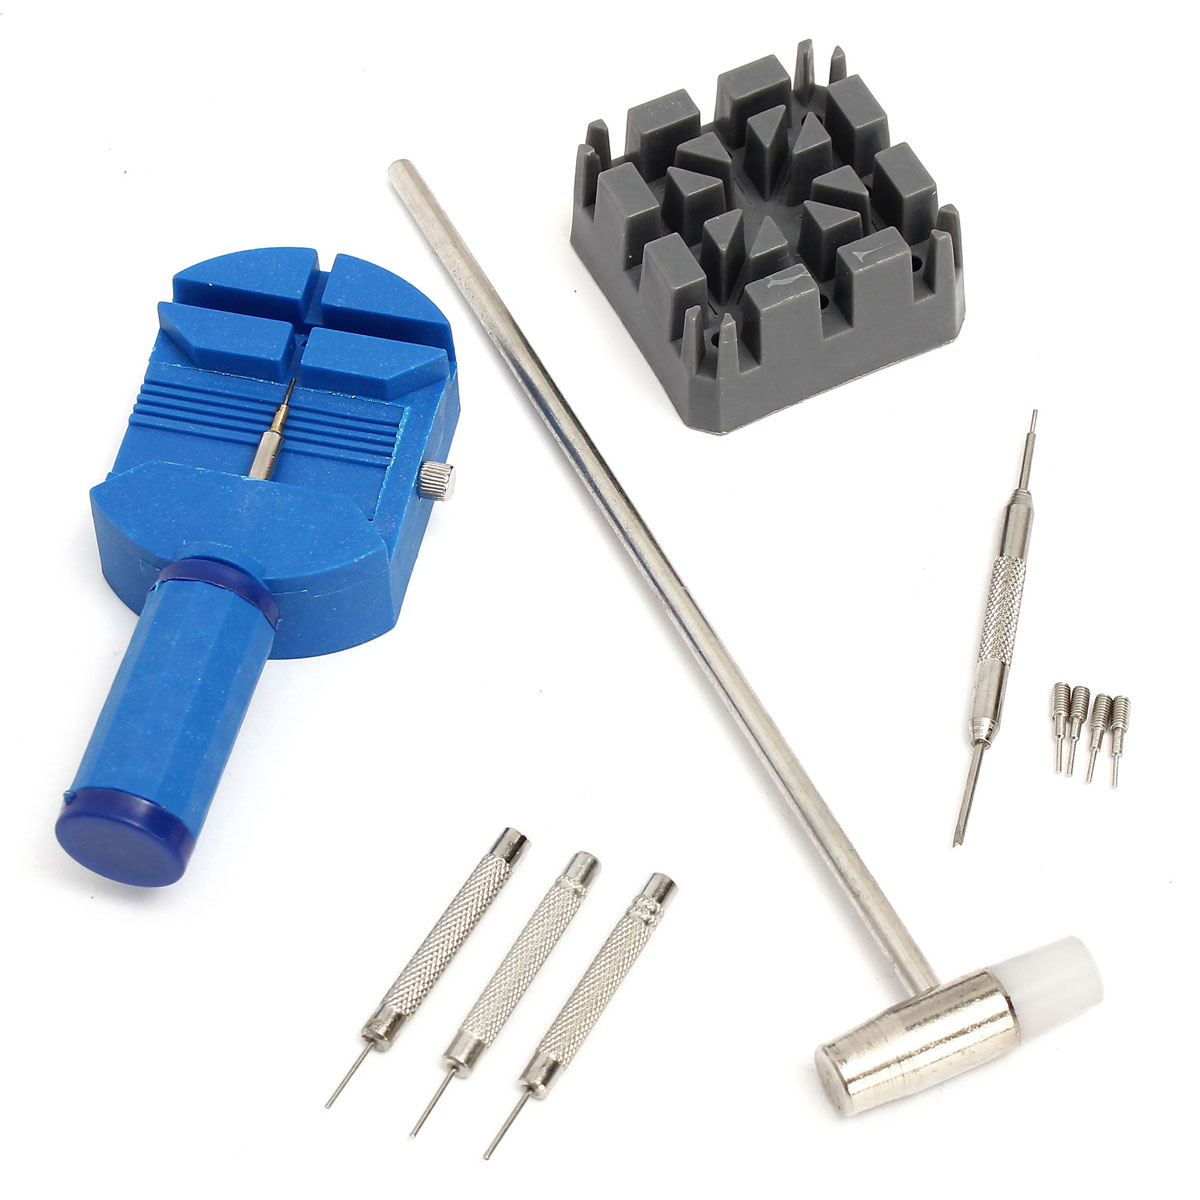 Details about   Band Strap Link Pin Remover Removal Adjustable Repair Tool Kit with 3 Extra Pins 